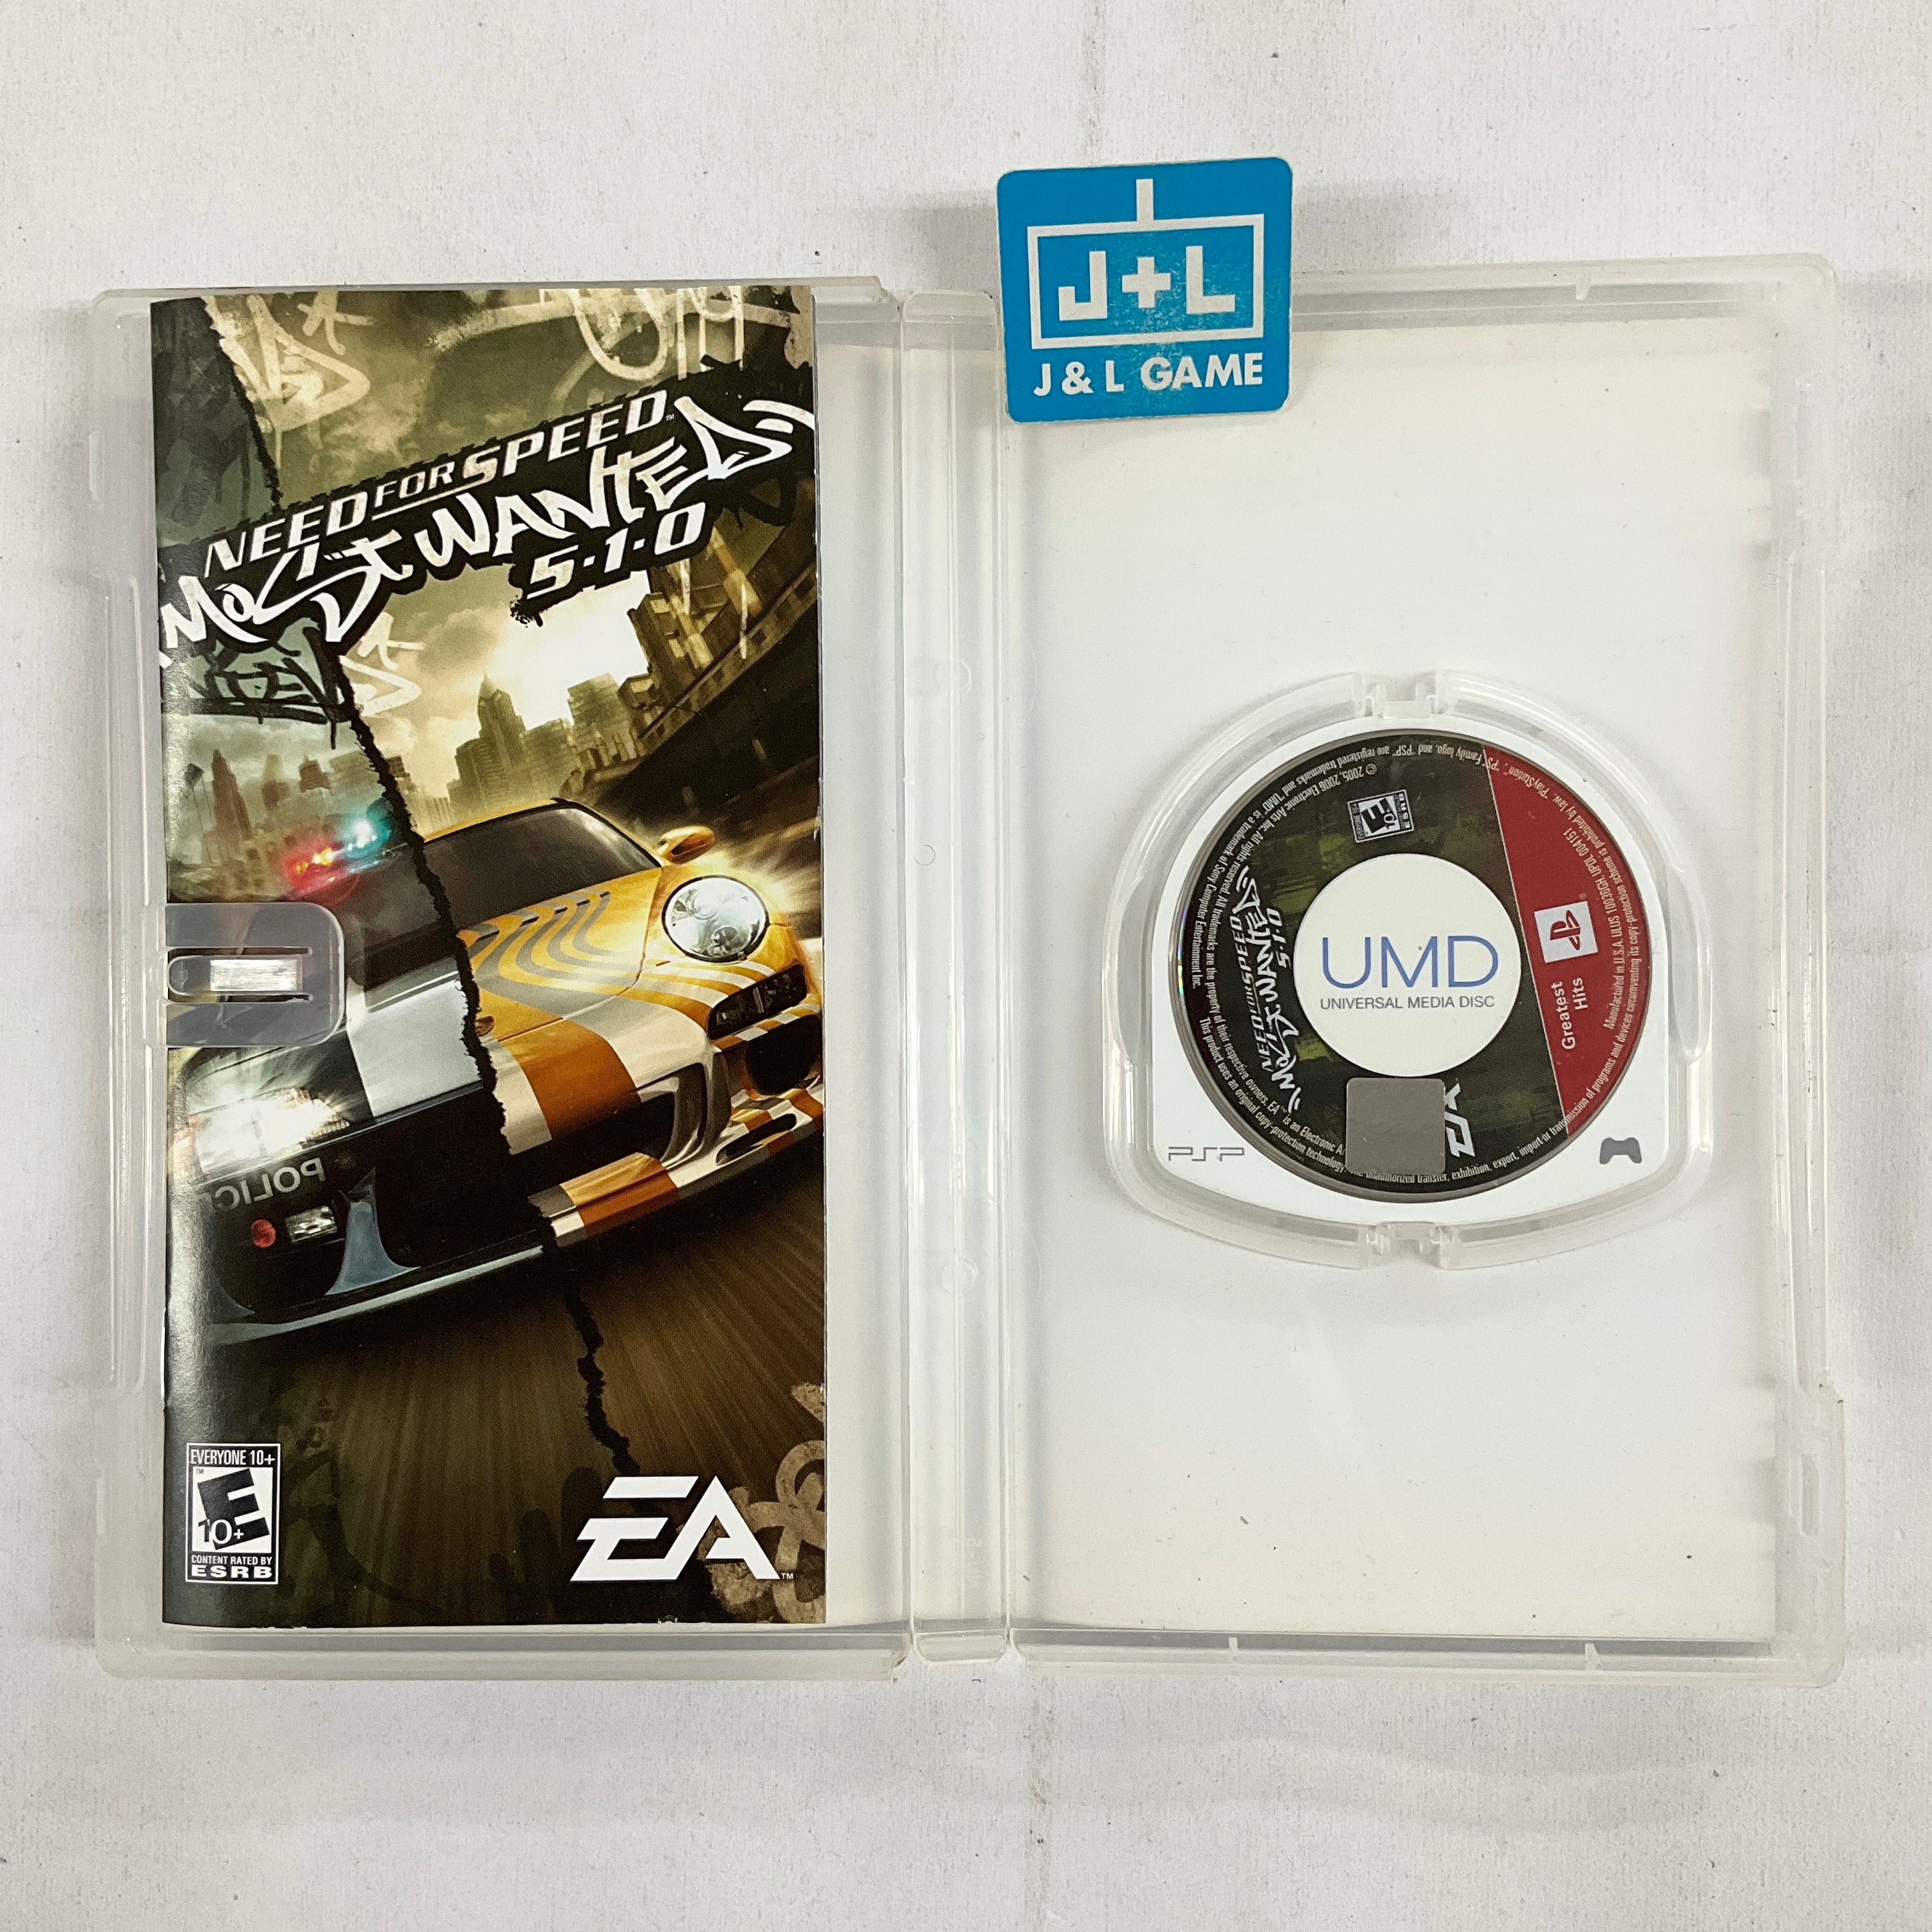 Need for Speed Most Wanted 5-1-0 (Greatest Hits) - SONY PSP [Pre-Owned] Video Games EA Games   